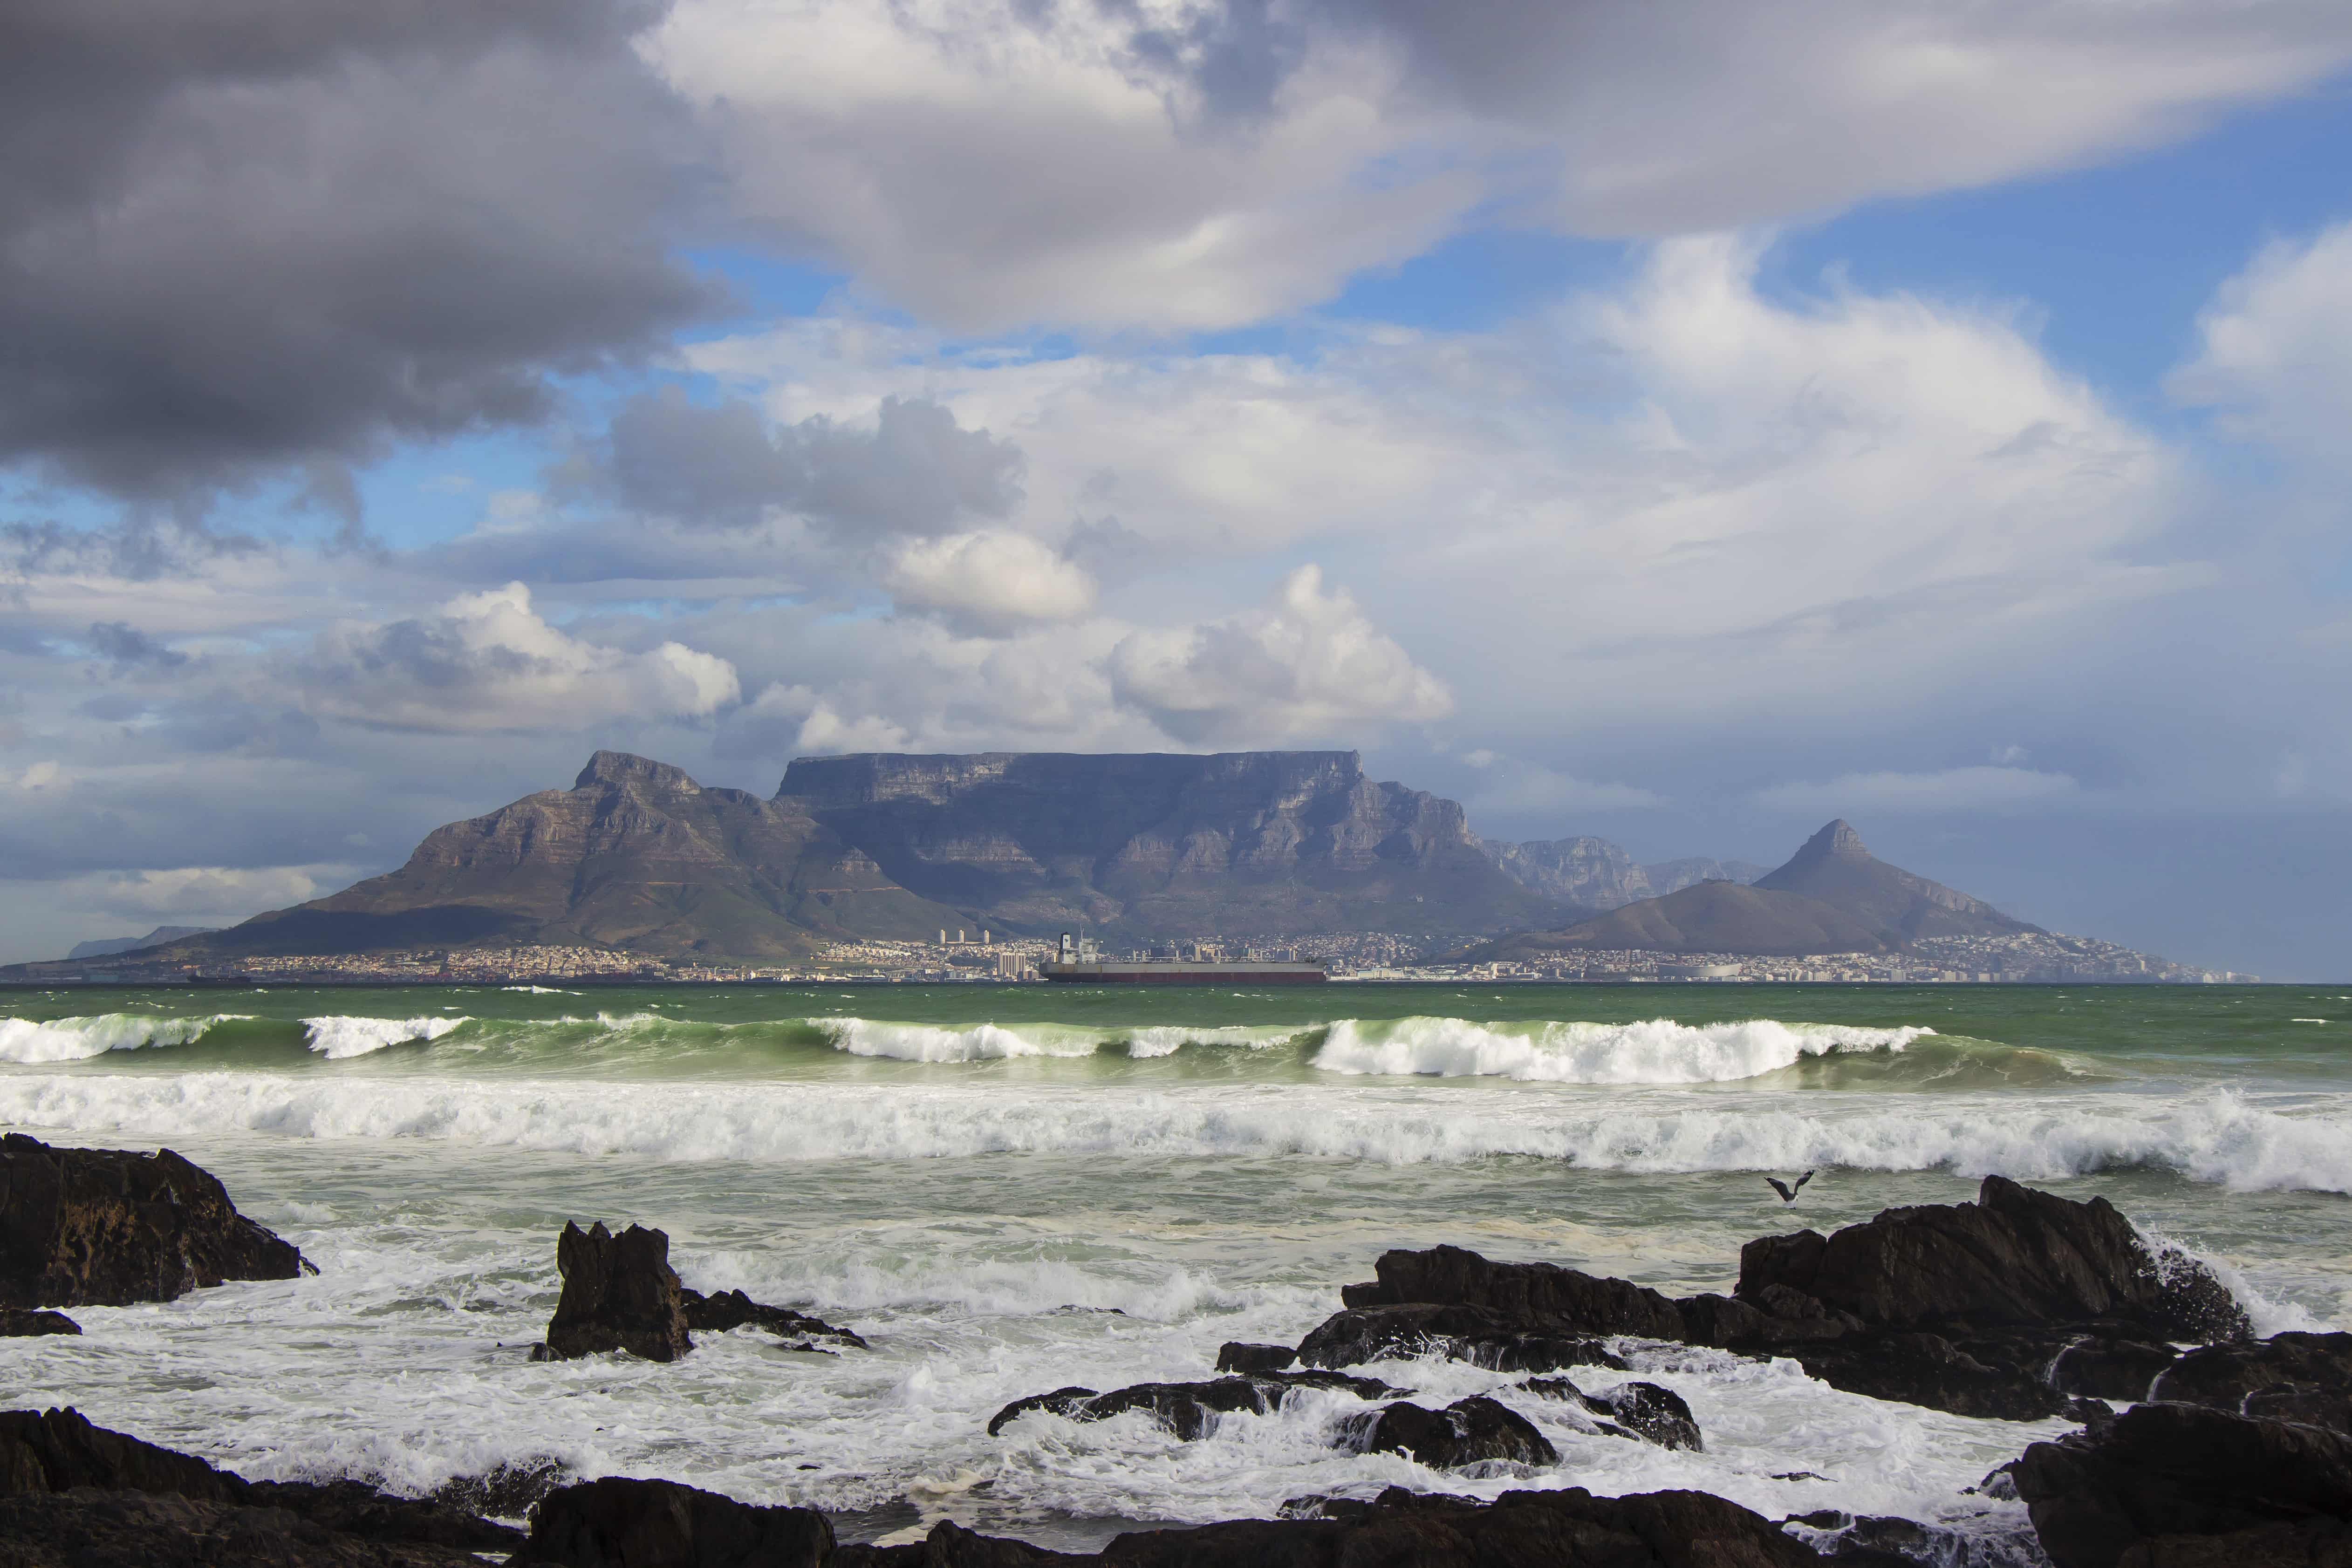 Cape Town voted as no 1 destination for 2014